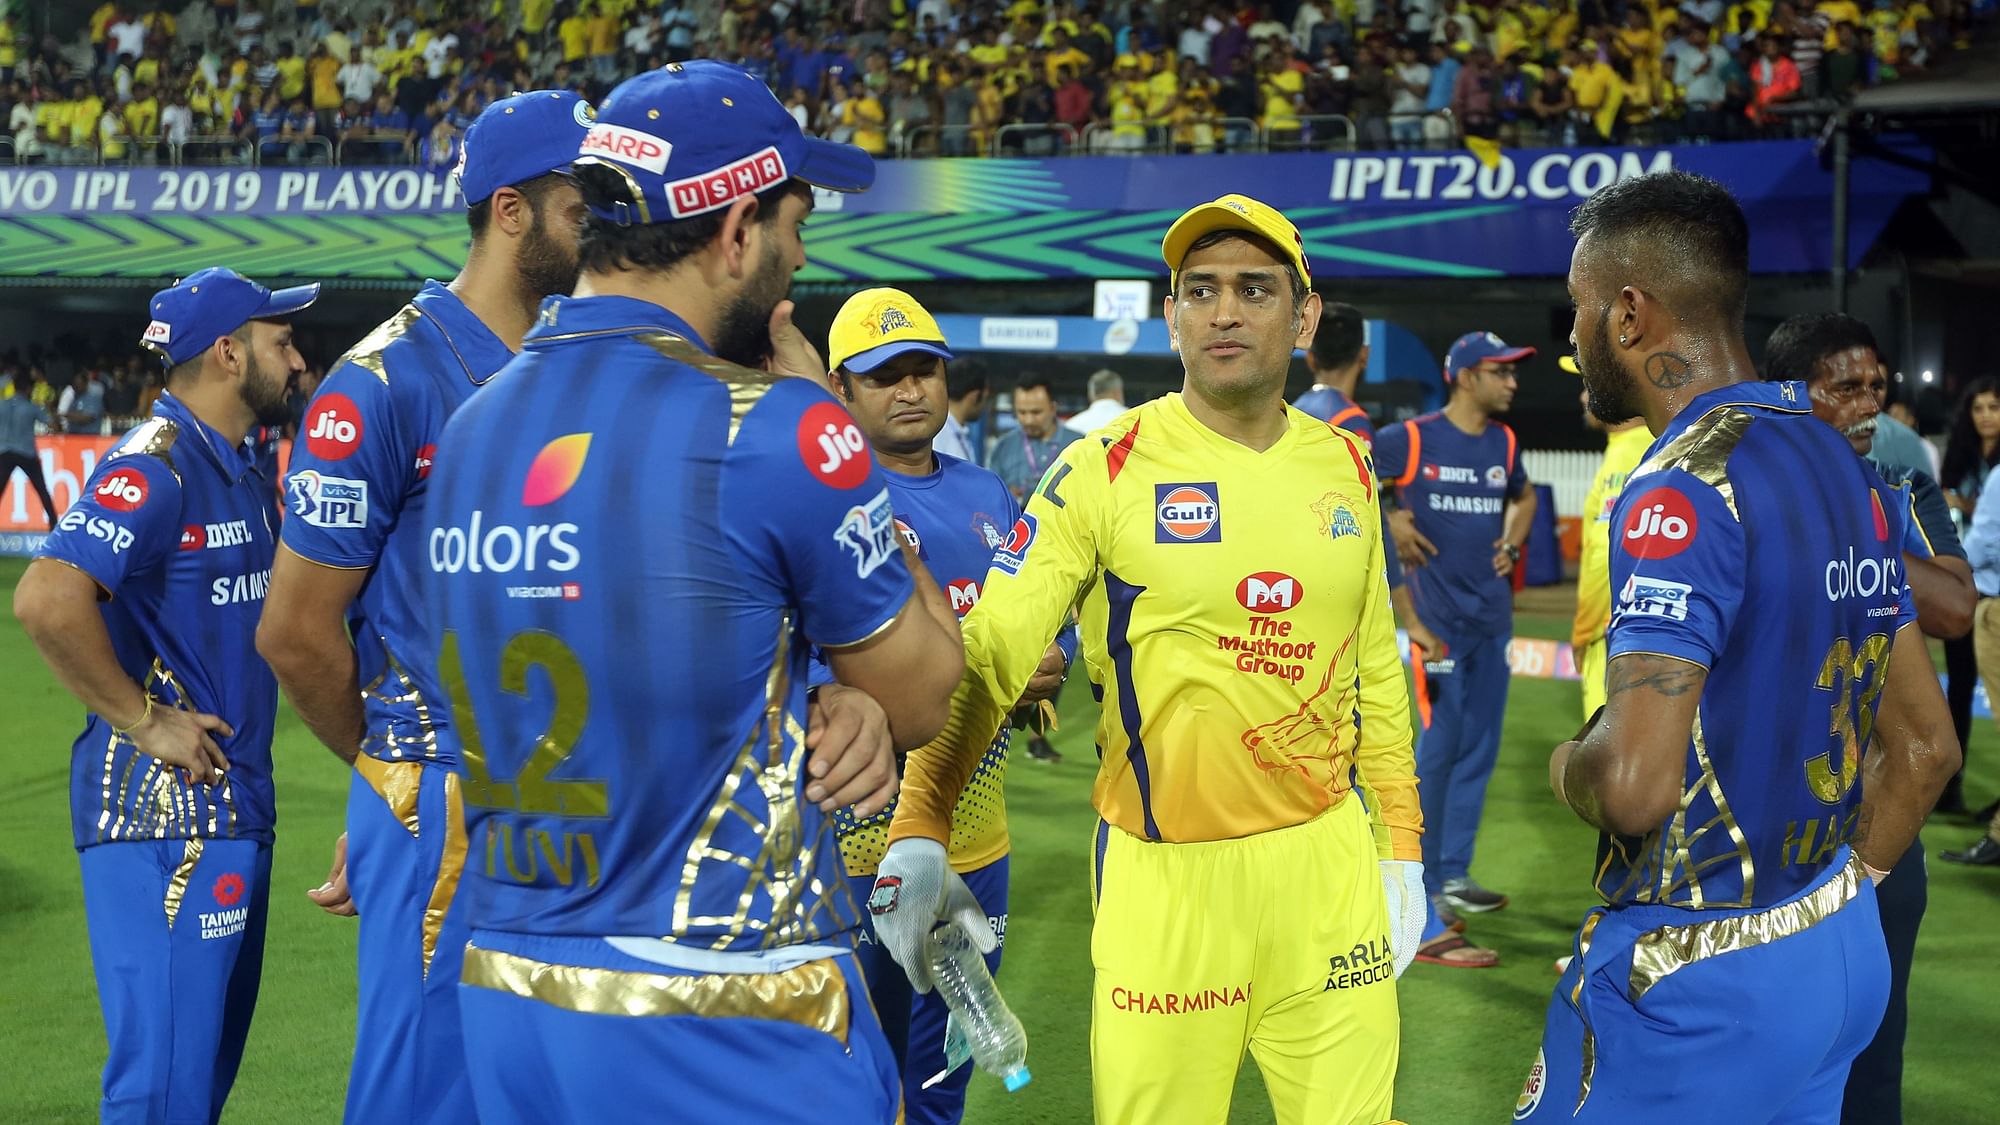 Mumbai Indians and Dhoni’s CSK have played three finals, with Mumbai emerging victorious in two.